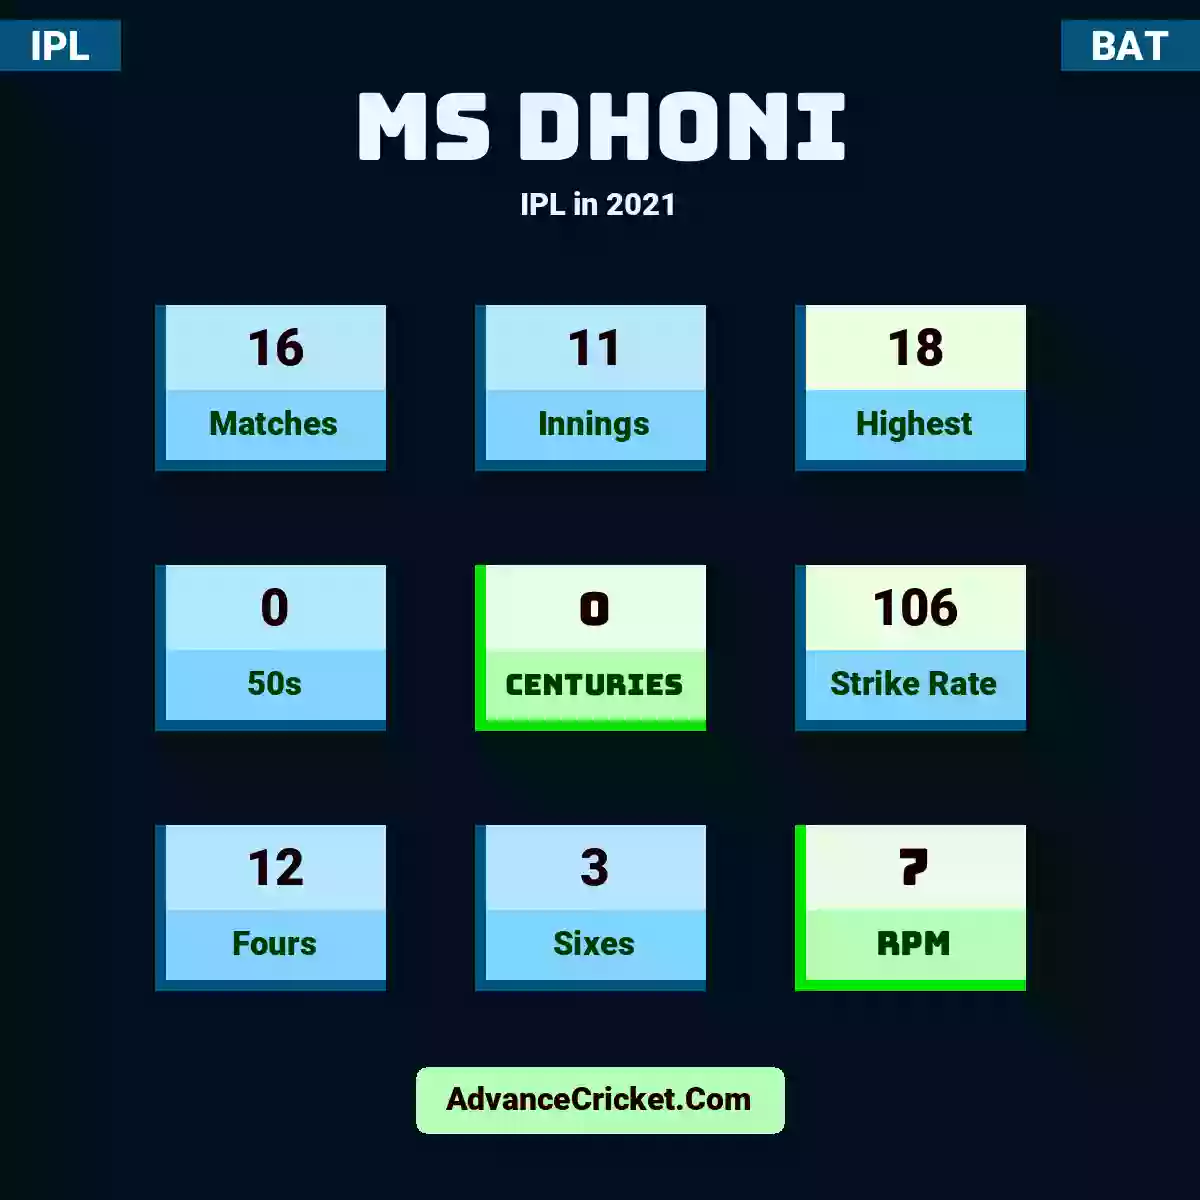 MS Dhoni IPL  in 2021, MS Dhoni played 16 matches, scored 18 runs as highest, 0 half-centuries, and 0 centuries, with a strike rate of 106. M.Dhoni hit 12 fours and 3 sixes, with an RPM of 7.